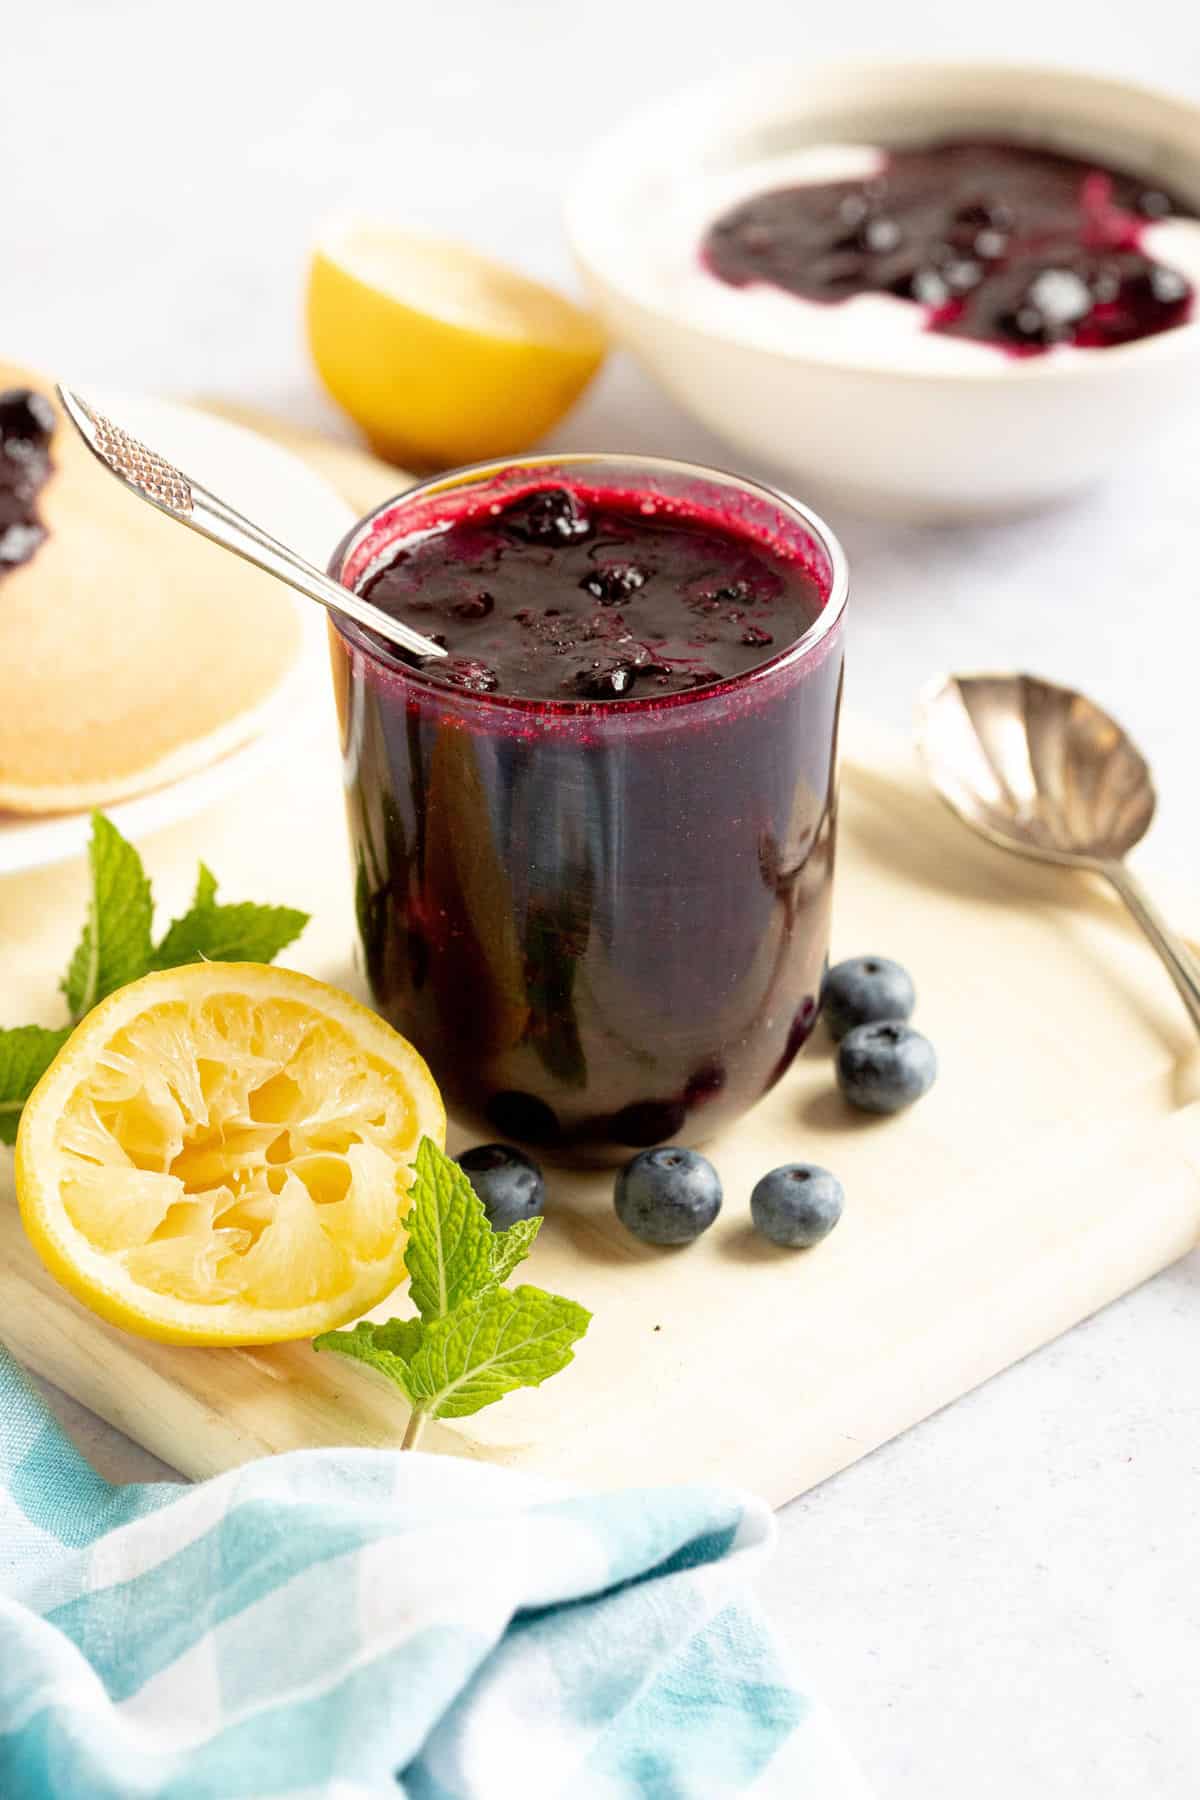 Blueberry compote in a jar.